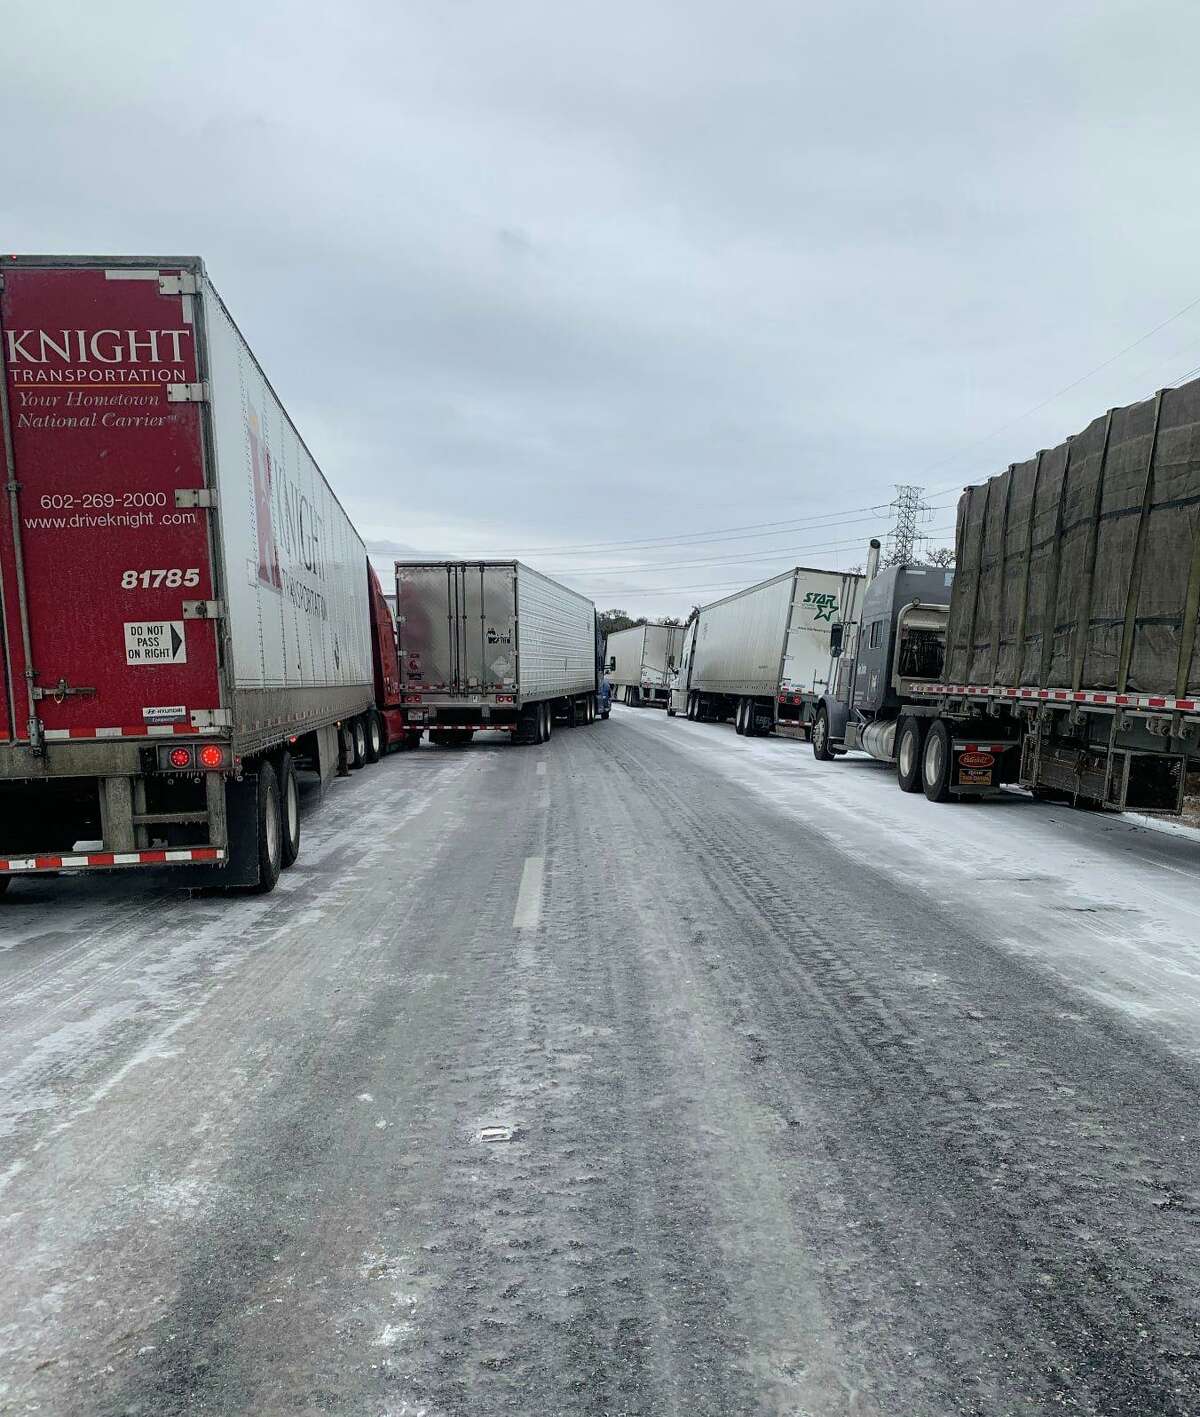 Hundreds of drivers were stranded on a northbound stretch of Interstate 10 near Kerrville on Friday morning after a late night crash caused traffic to remain at a standstill.